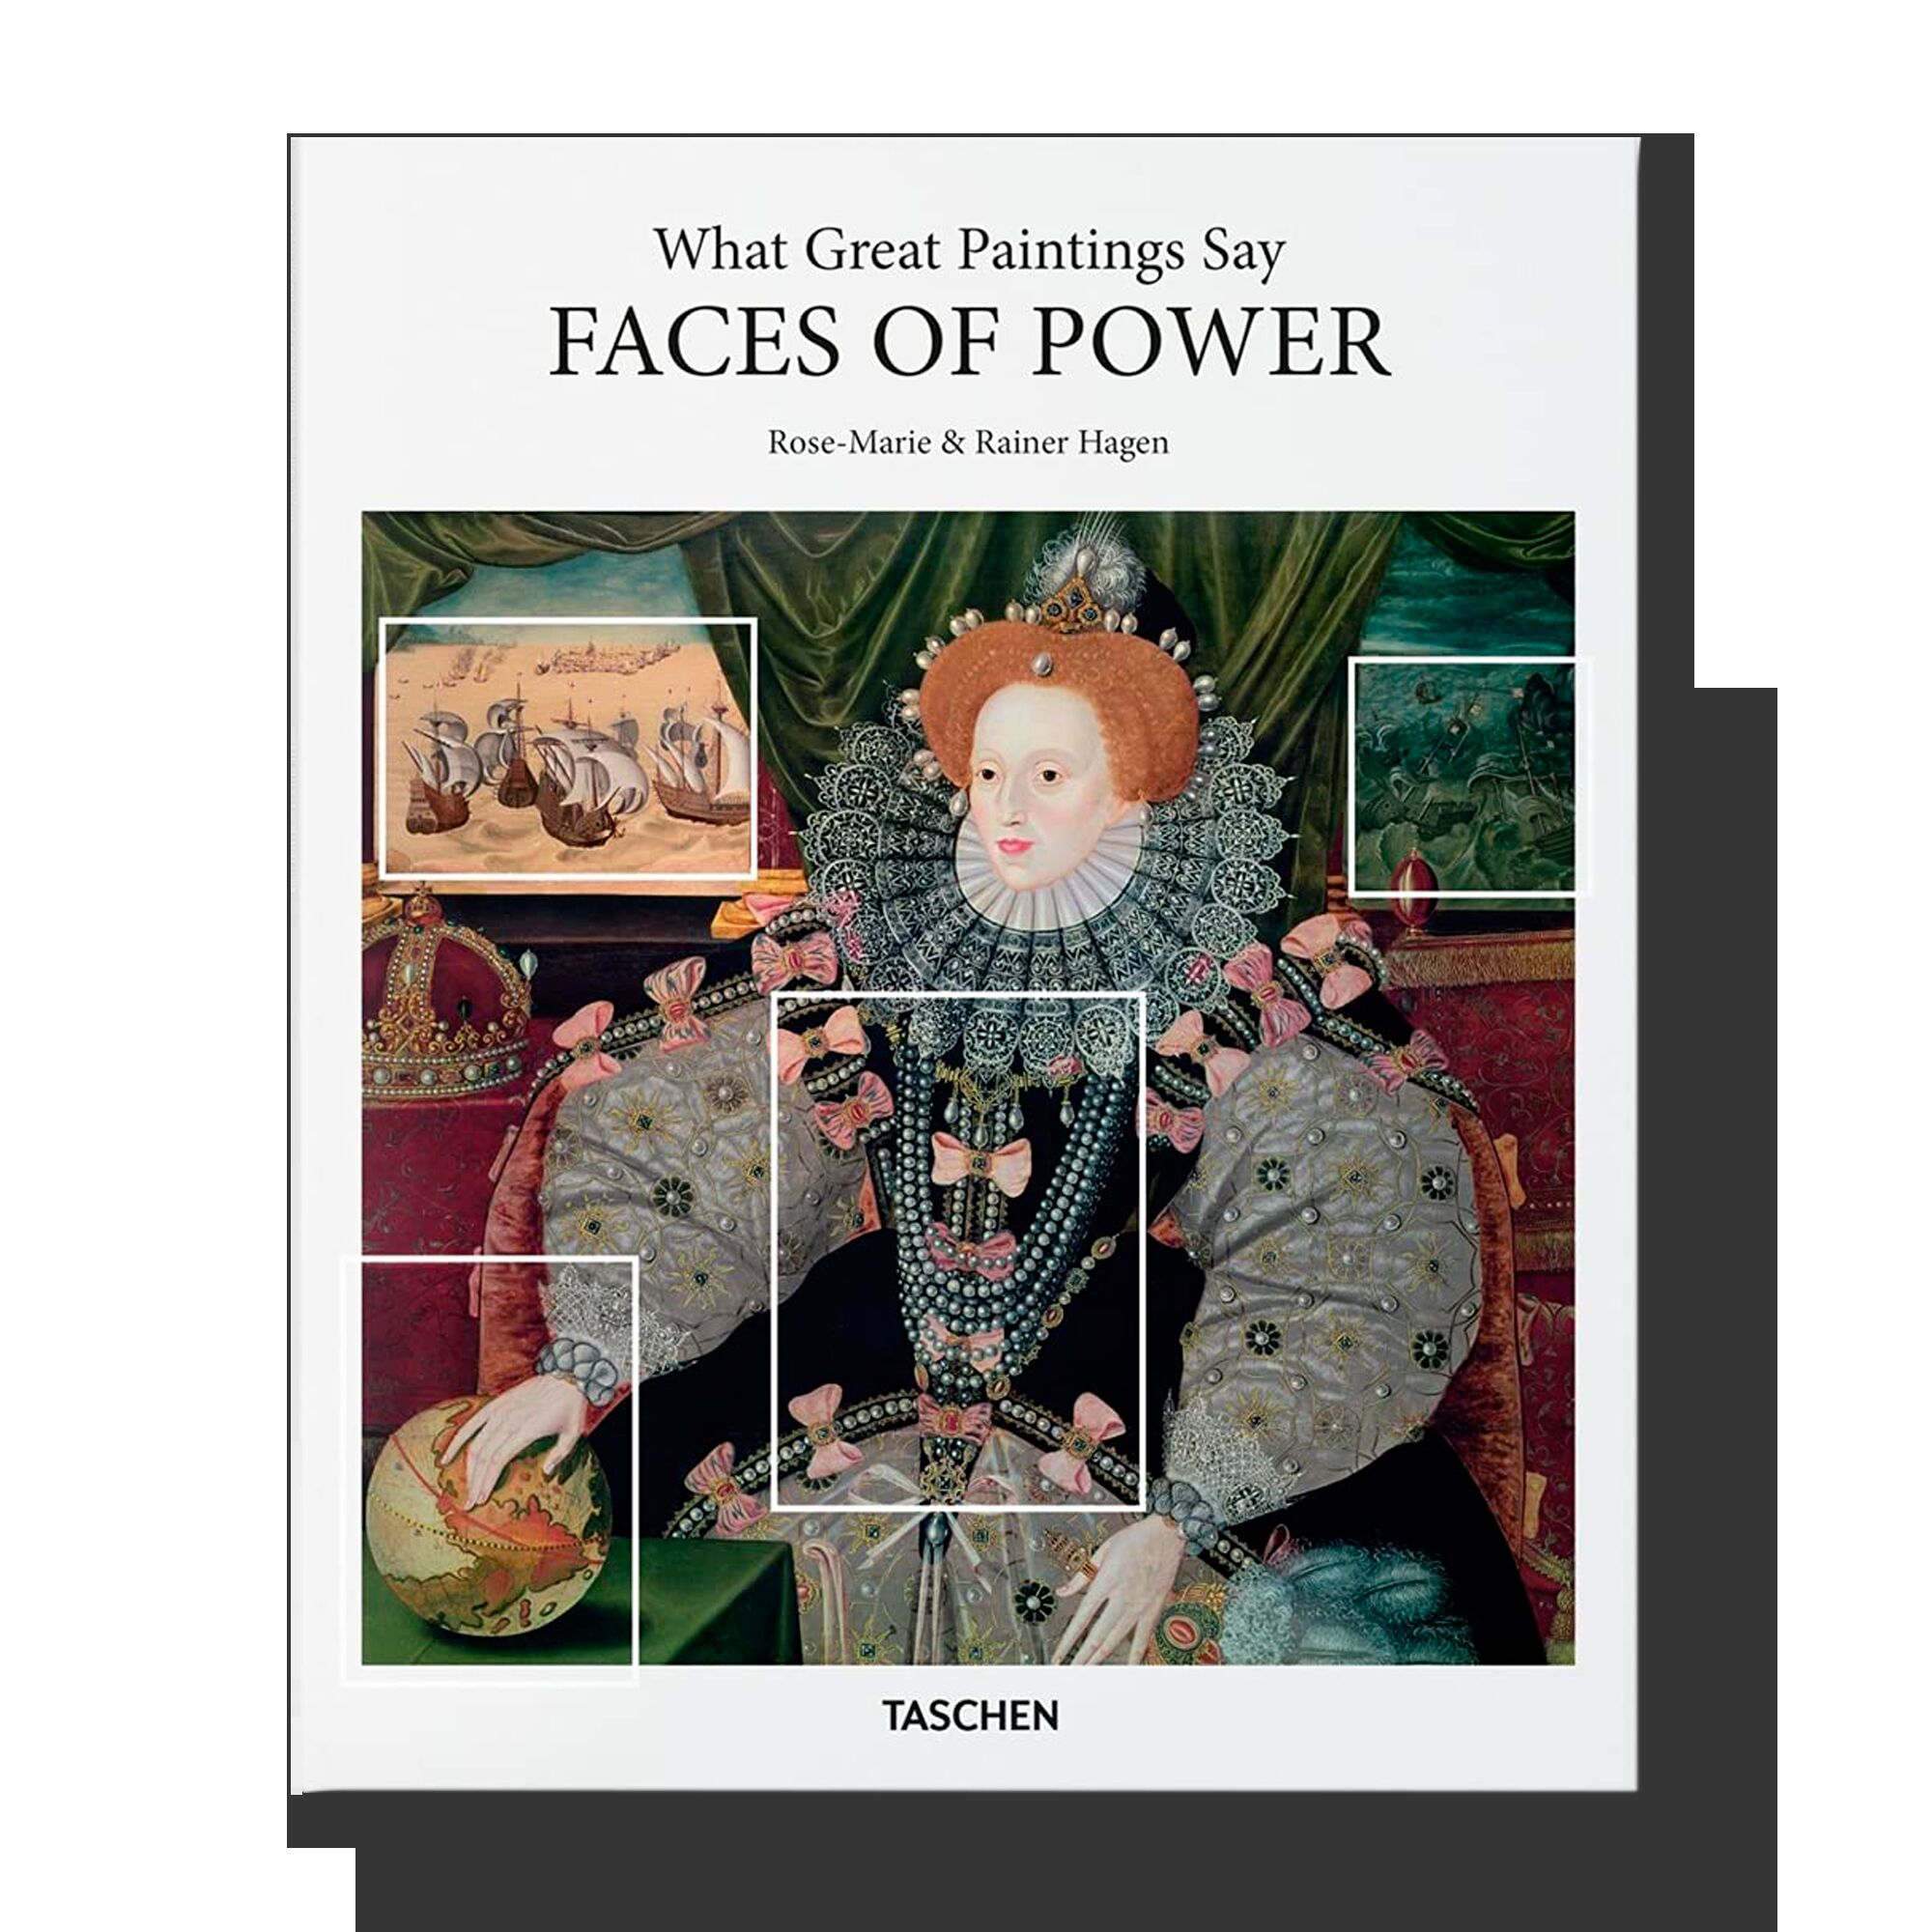 What Great Paintings Say: Faces of Power (Basic Art Series)